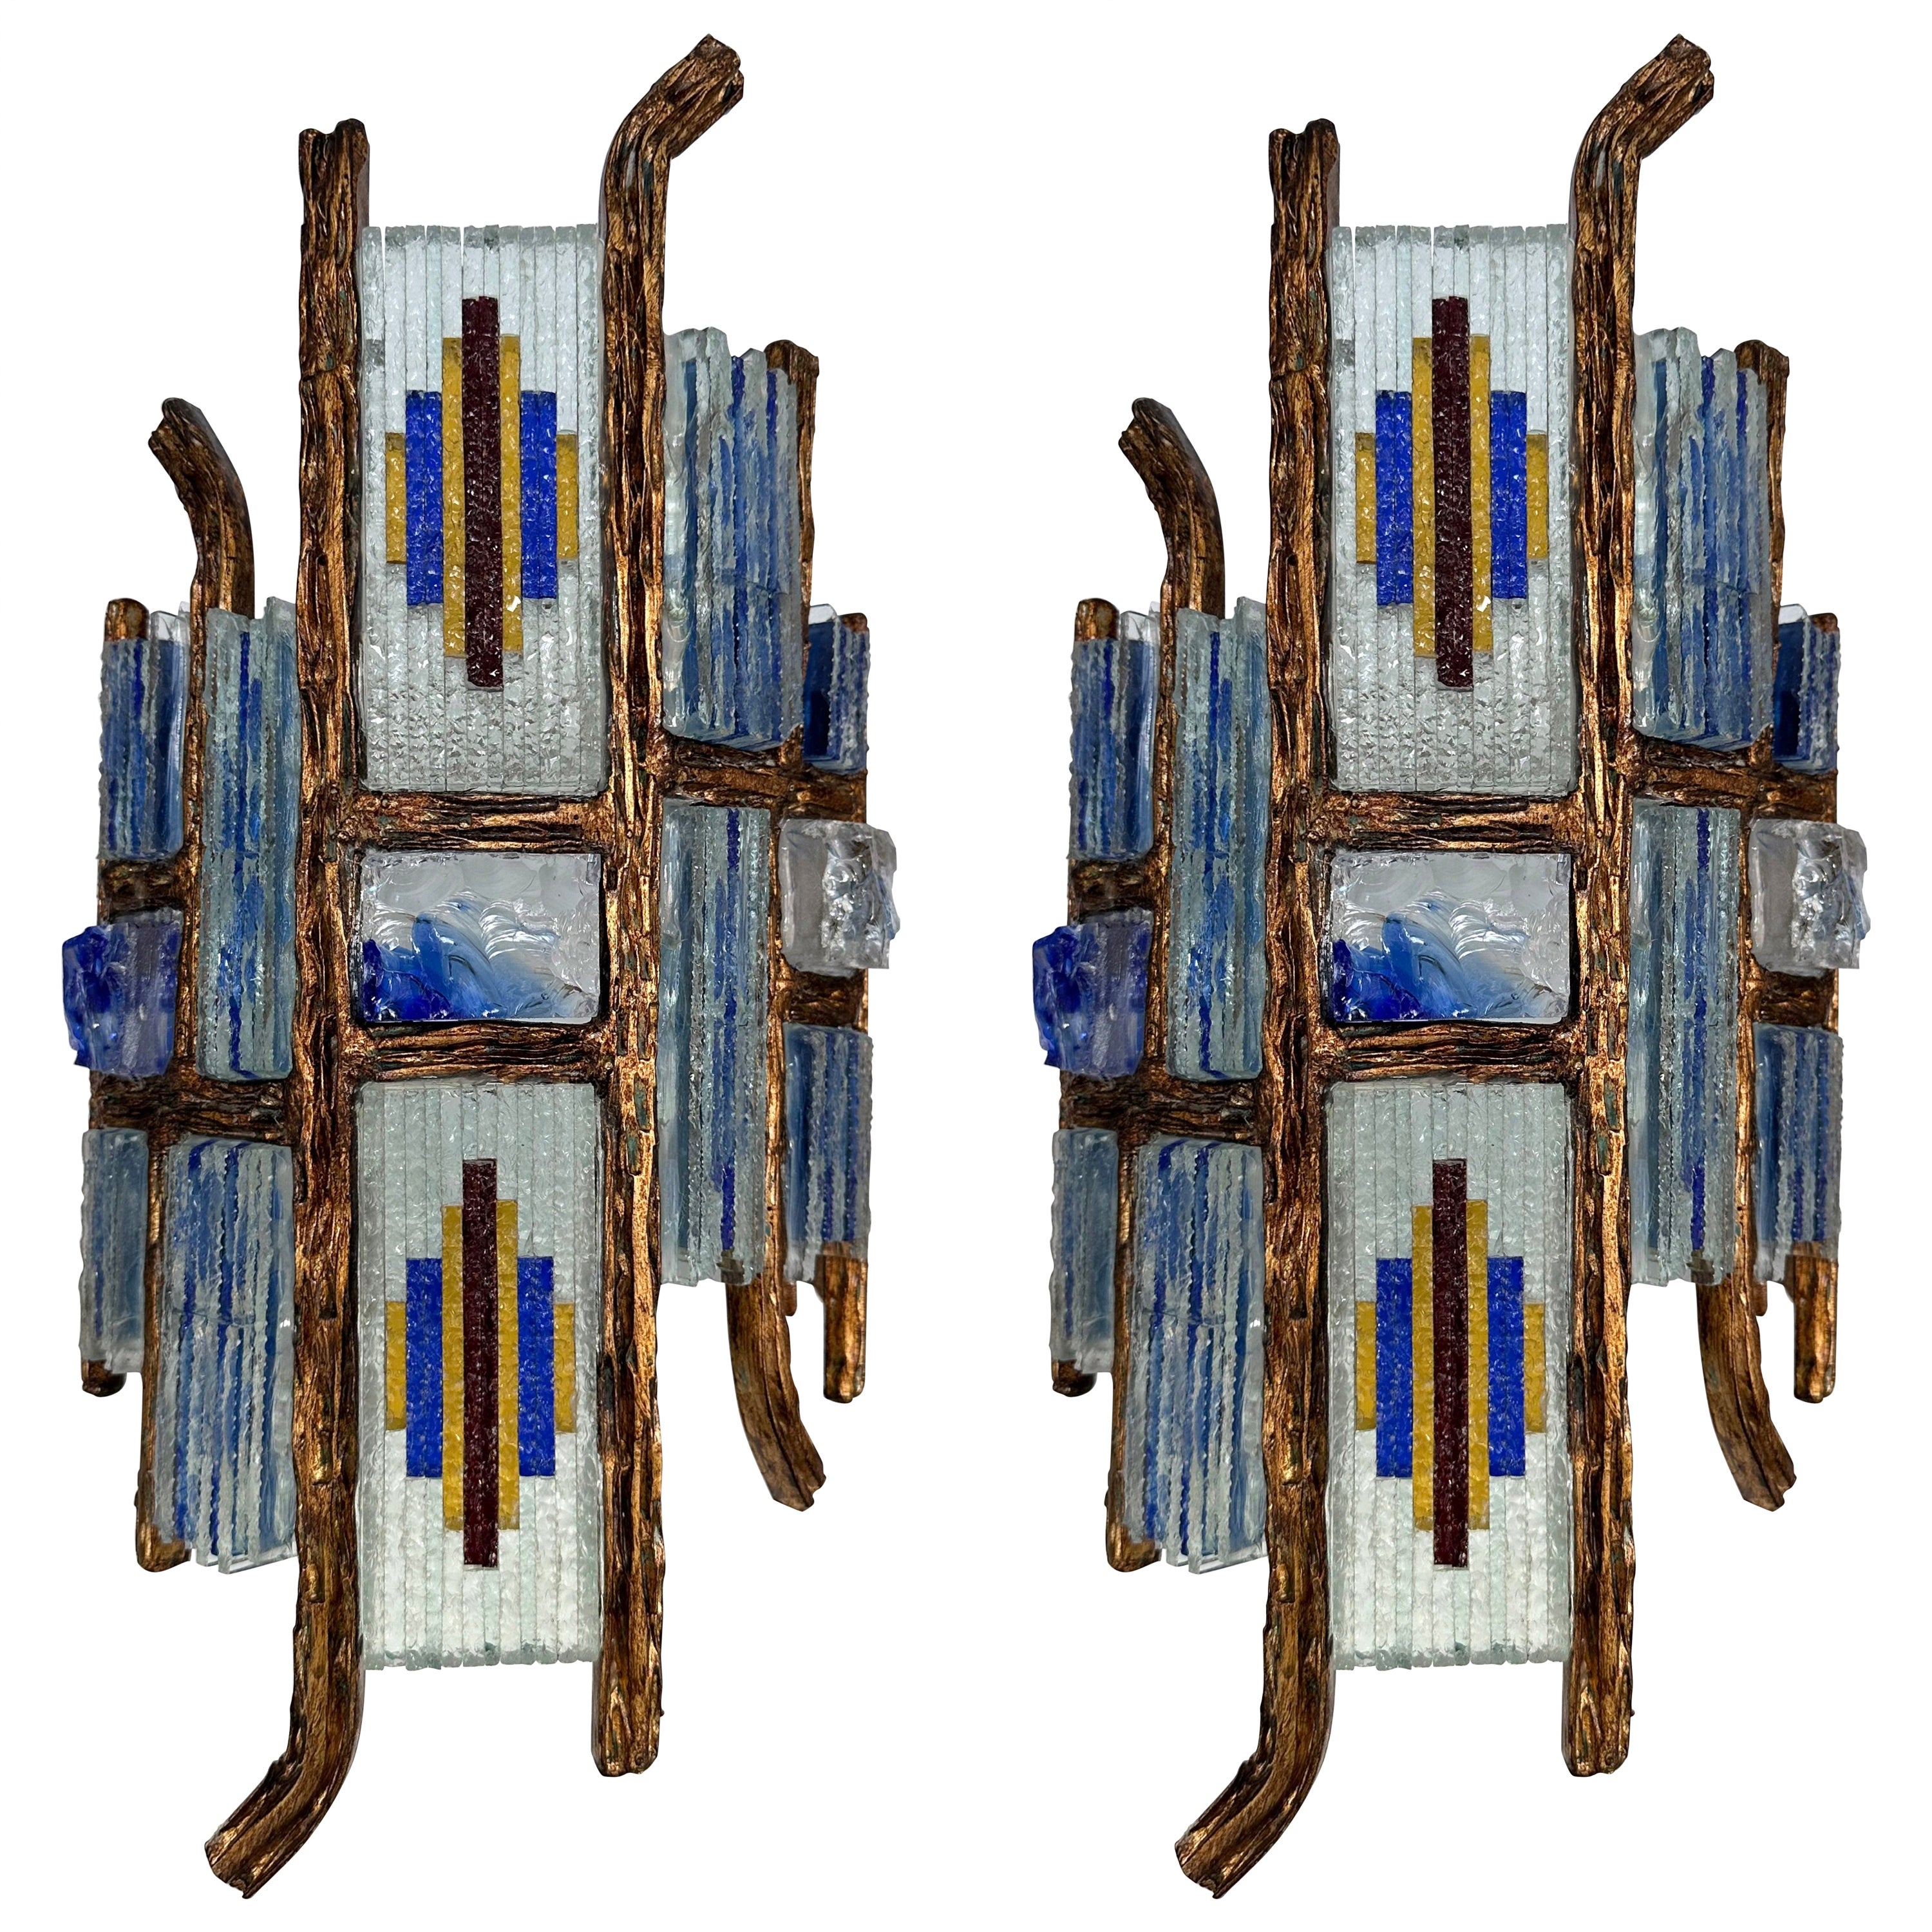 Pair of Hammered Glass Wrought Iron Sconces by Longobard, Italy, 1970s For Sale